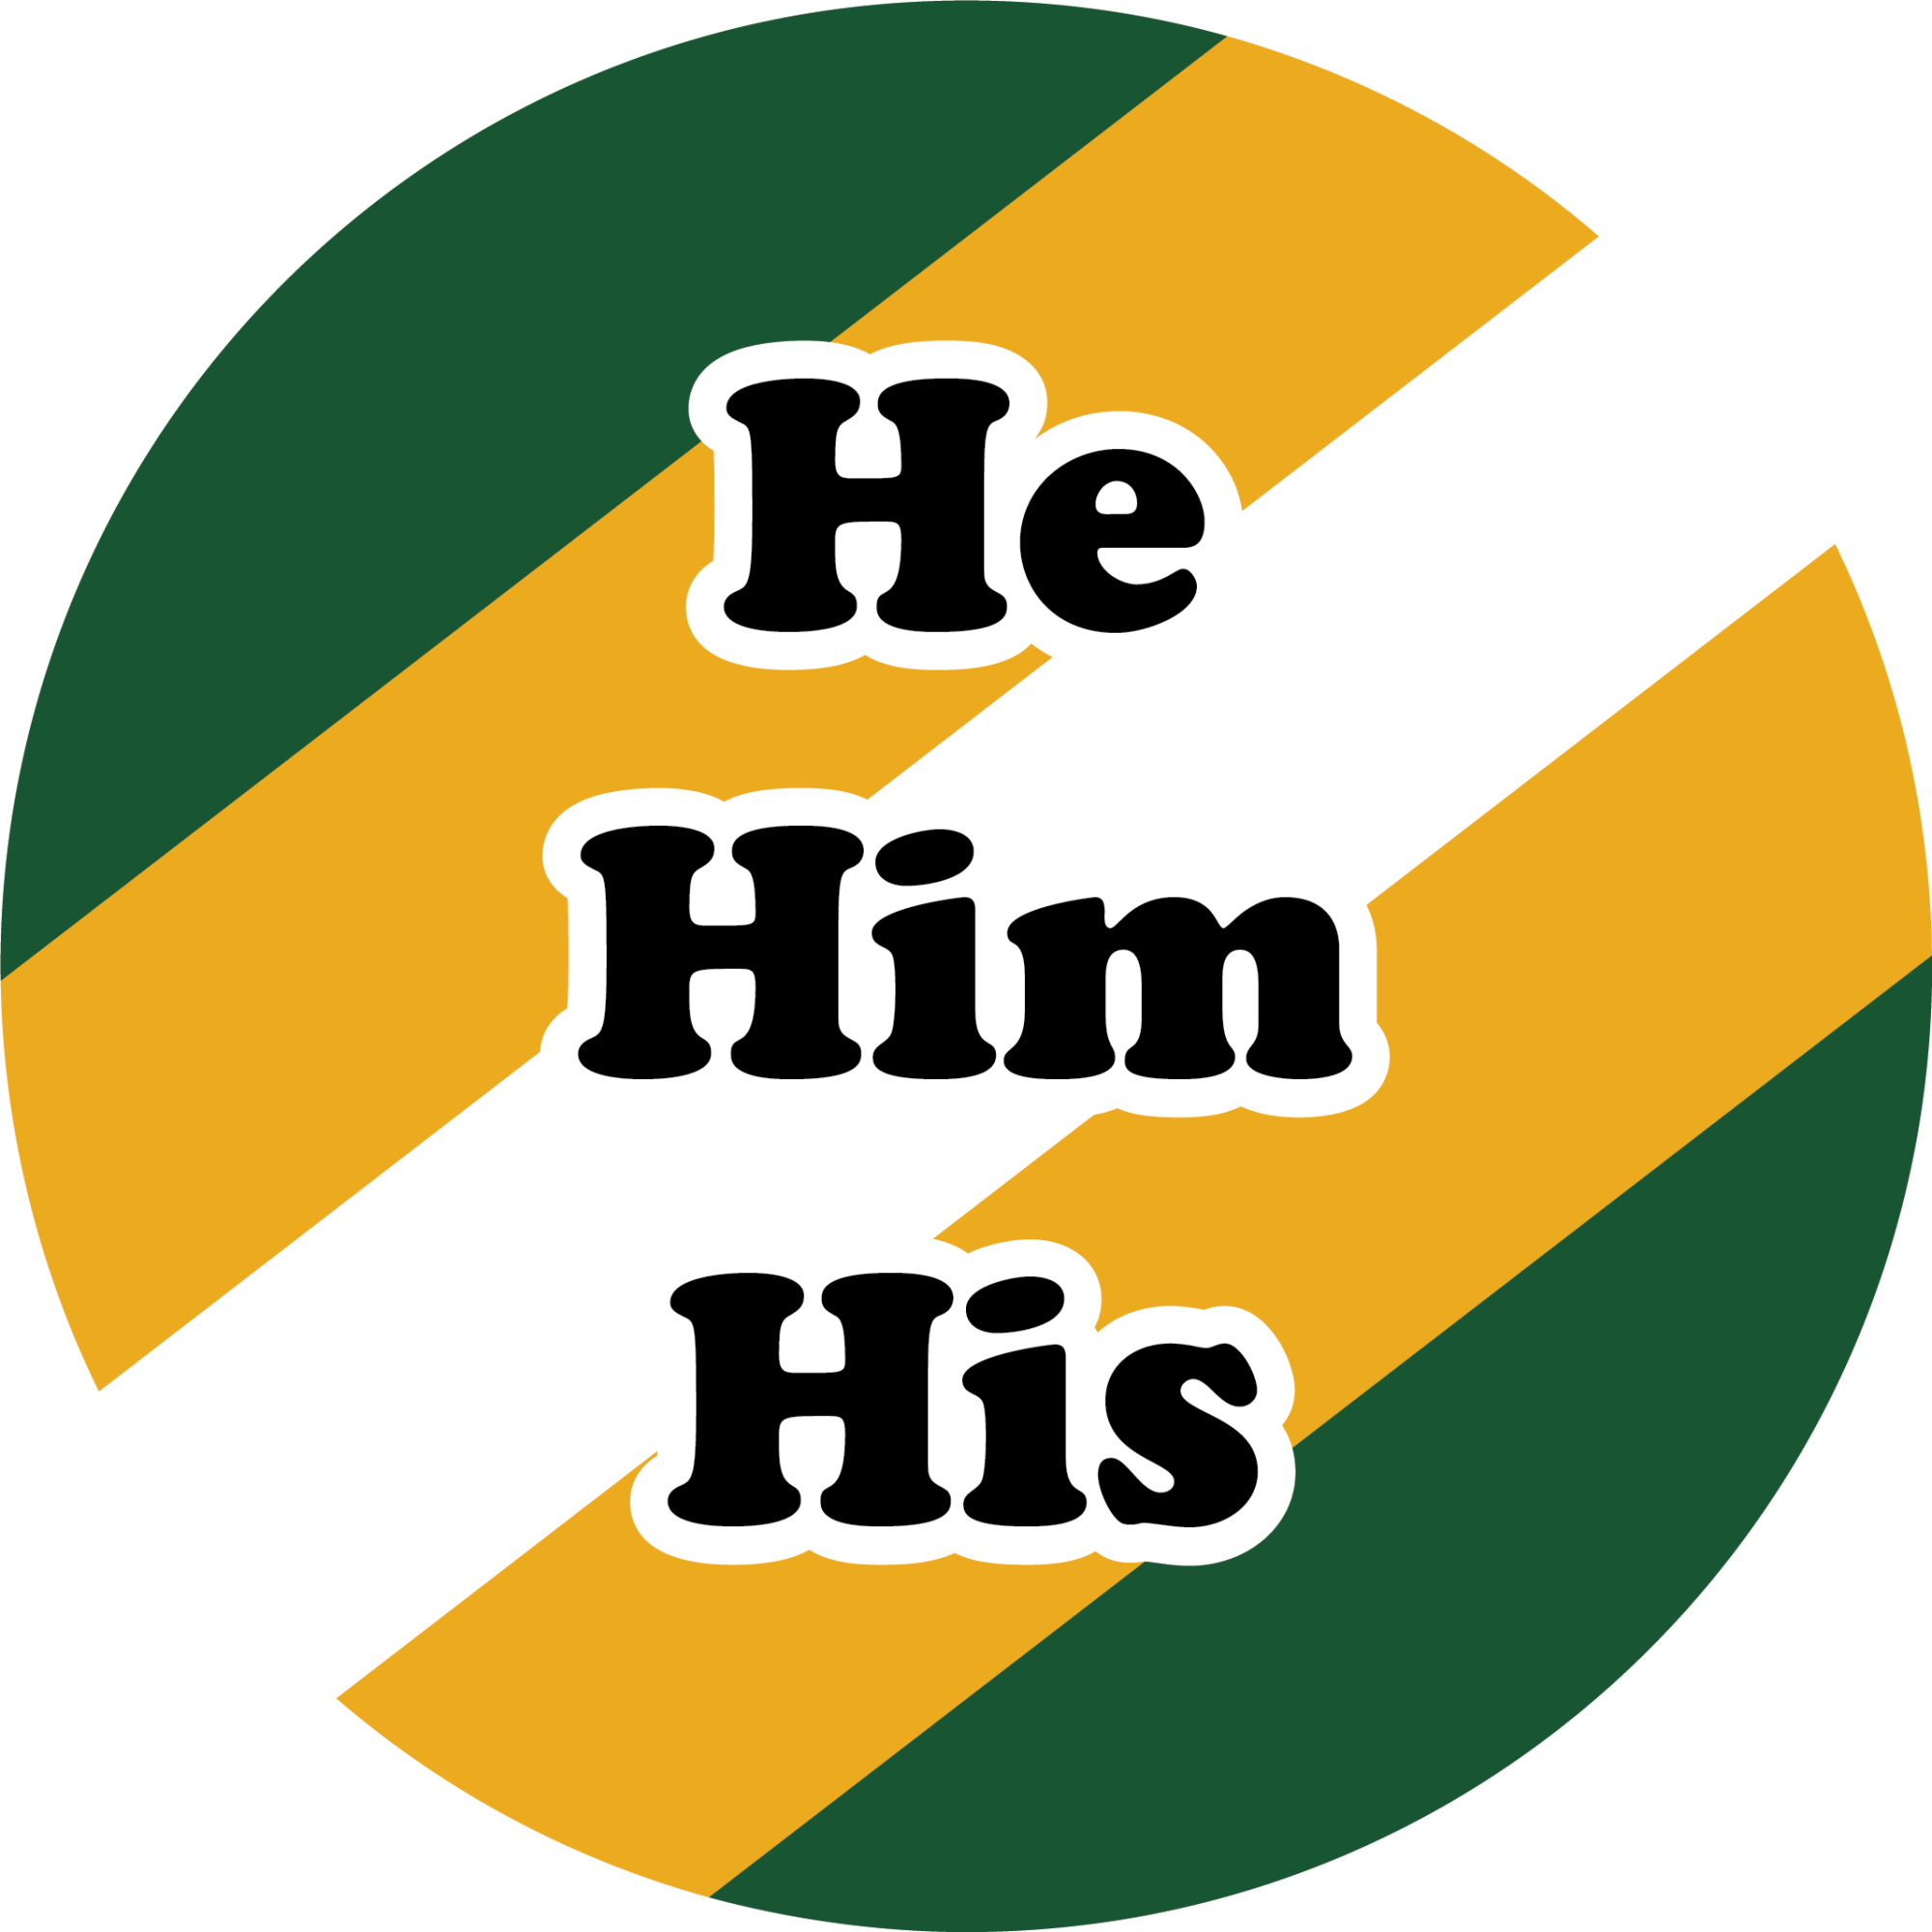 He Him His on a green, gold, and white striped background